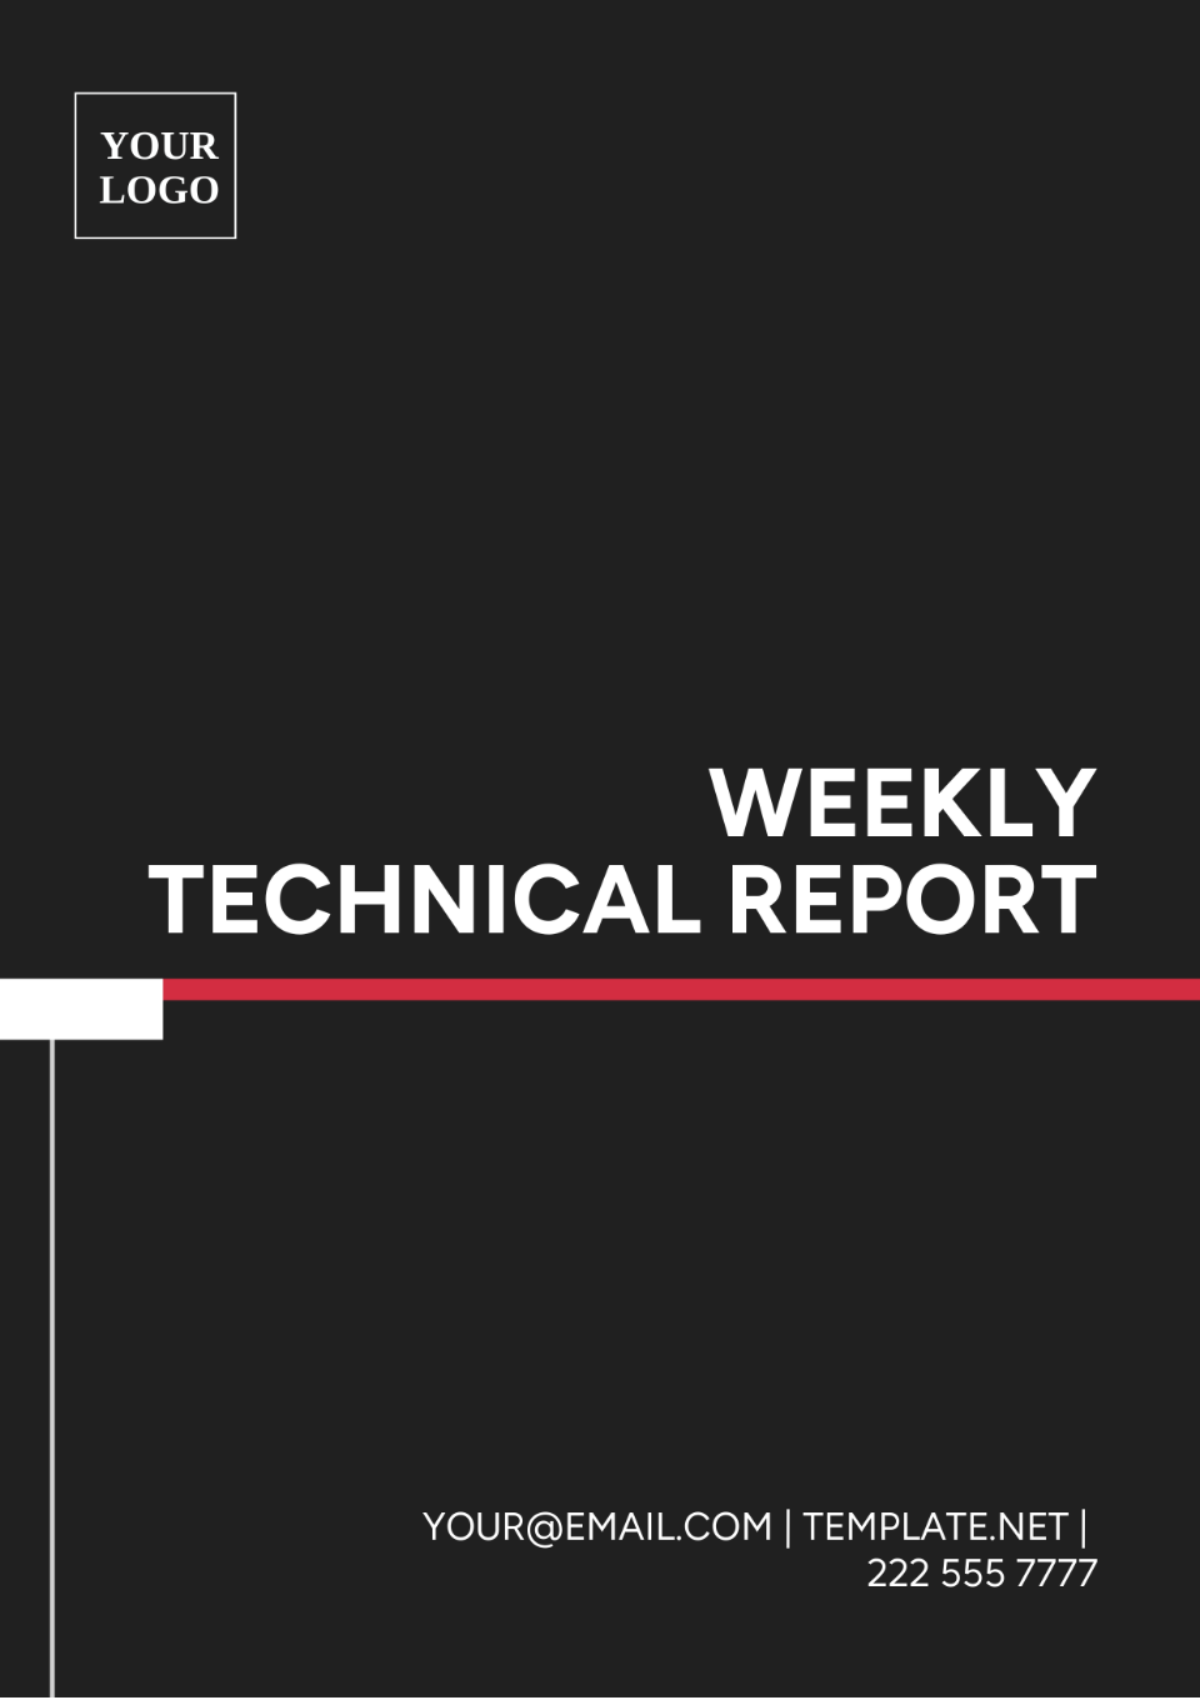 Weekly Technical Report Template